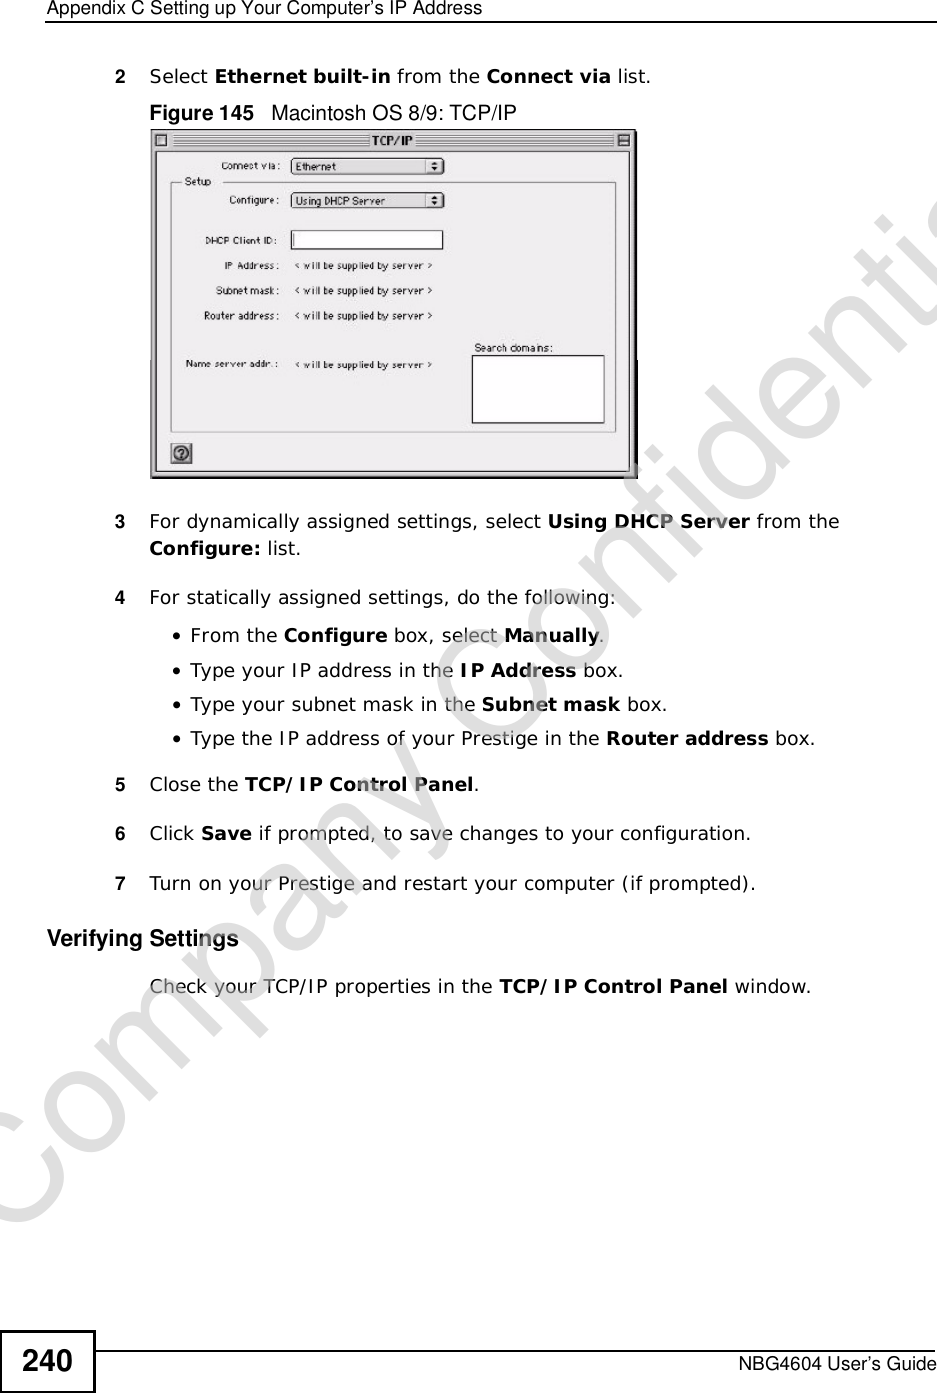 Appendix CSetting up Your Computer’s IP AddressNBG4604 User’s Guide2402Select Ethernet built-in from the Connect via list.Figure 145   Macintosh OS 8/9: TCP/IP3For dynamically assigned settings, select Using DHCP Server from the Configure: list.4For statically assigned settings, do the following:•From the Configure box, select Manually.•Type your IP address in the IP Address box.•Type your subnet mask in the Subnet mask box.•Type the IP address of your Prestige in the Router address box.5Close the TCP/IP Control Panel.6Click Save if prompted, to save changes to your configuration.7Turn on your Prestige and restart your computer (if prompted).Verifying SettingsCheck your TCP/IP properties in the TCP/IP Control Panel window.Company Confidential